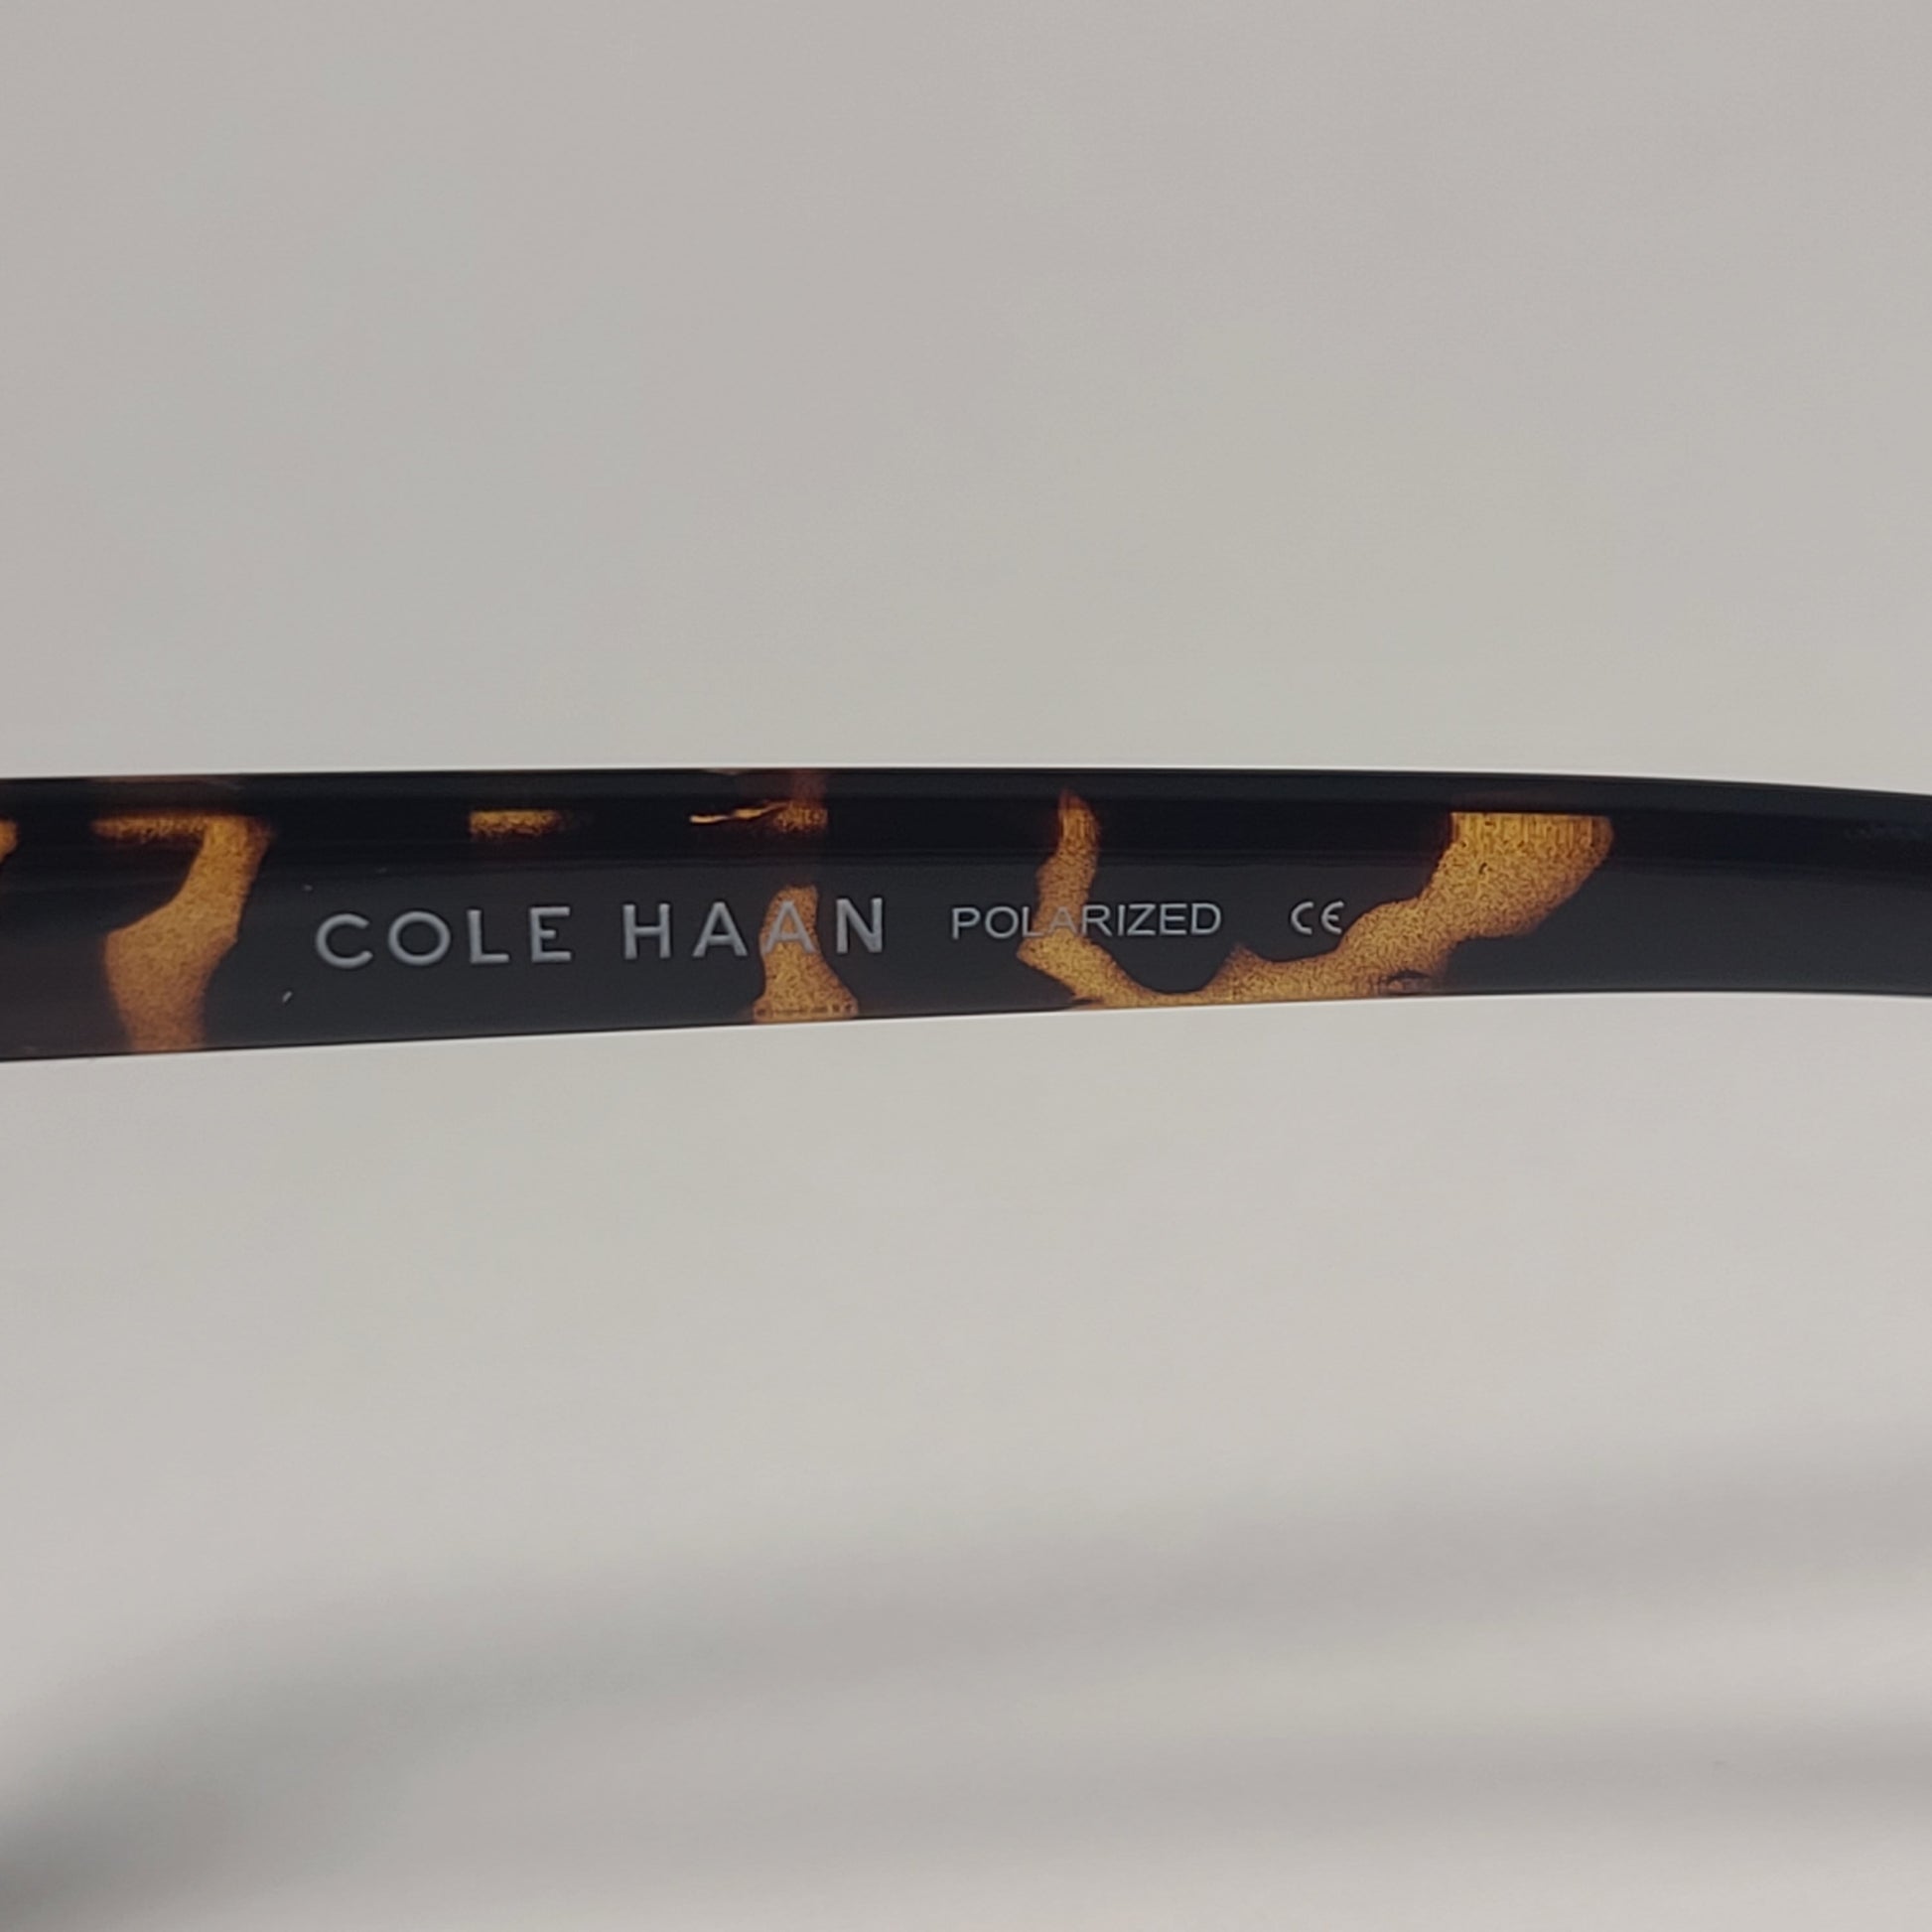 Cole Haan CH9024 215 TORTOISE Soft Round Polarized Sunglasses Brown Tortoise Frame Brown Lens - Sunglasses